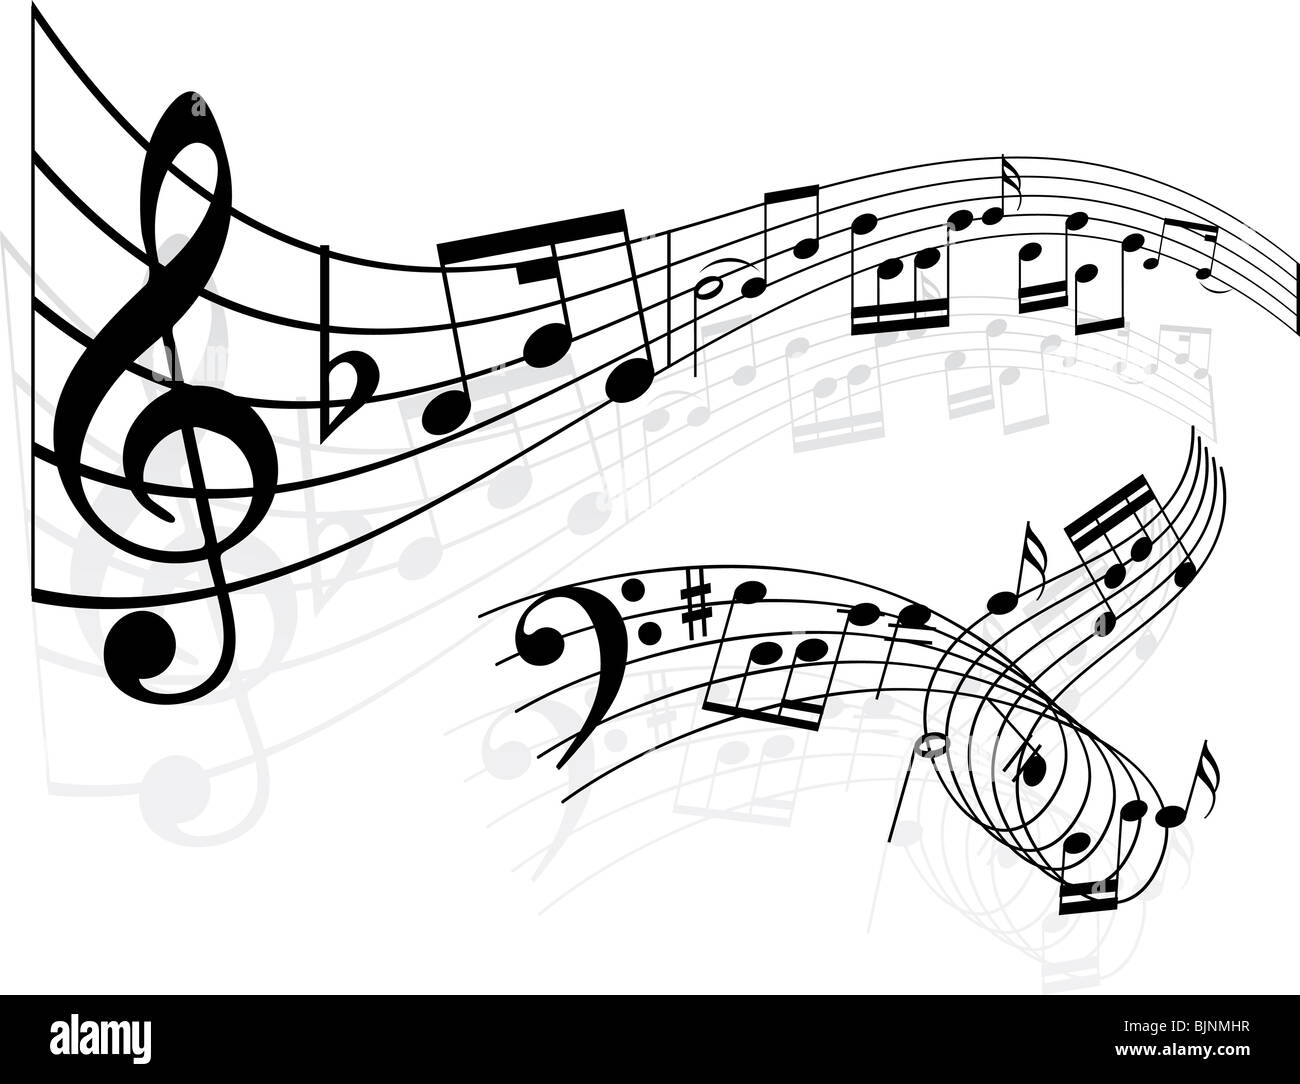 Music notes backgrounds Stock Photo